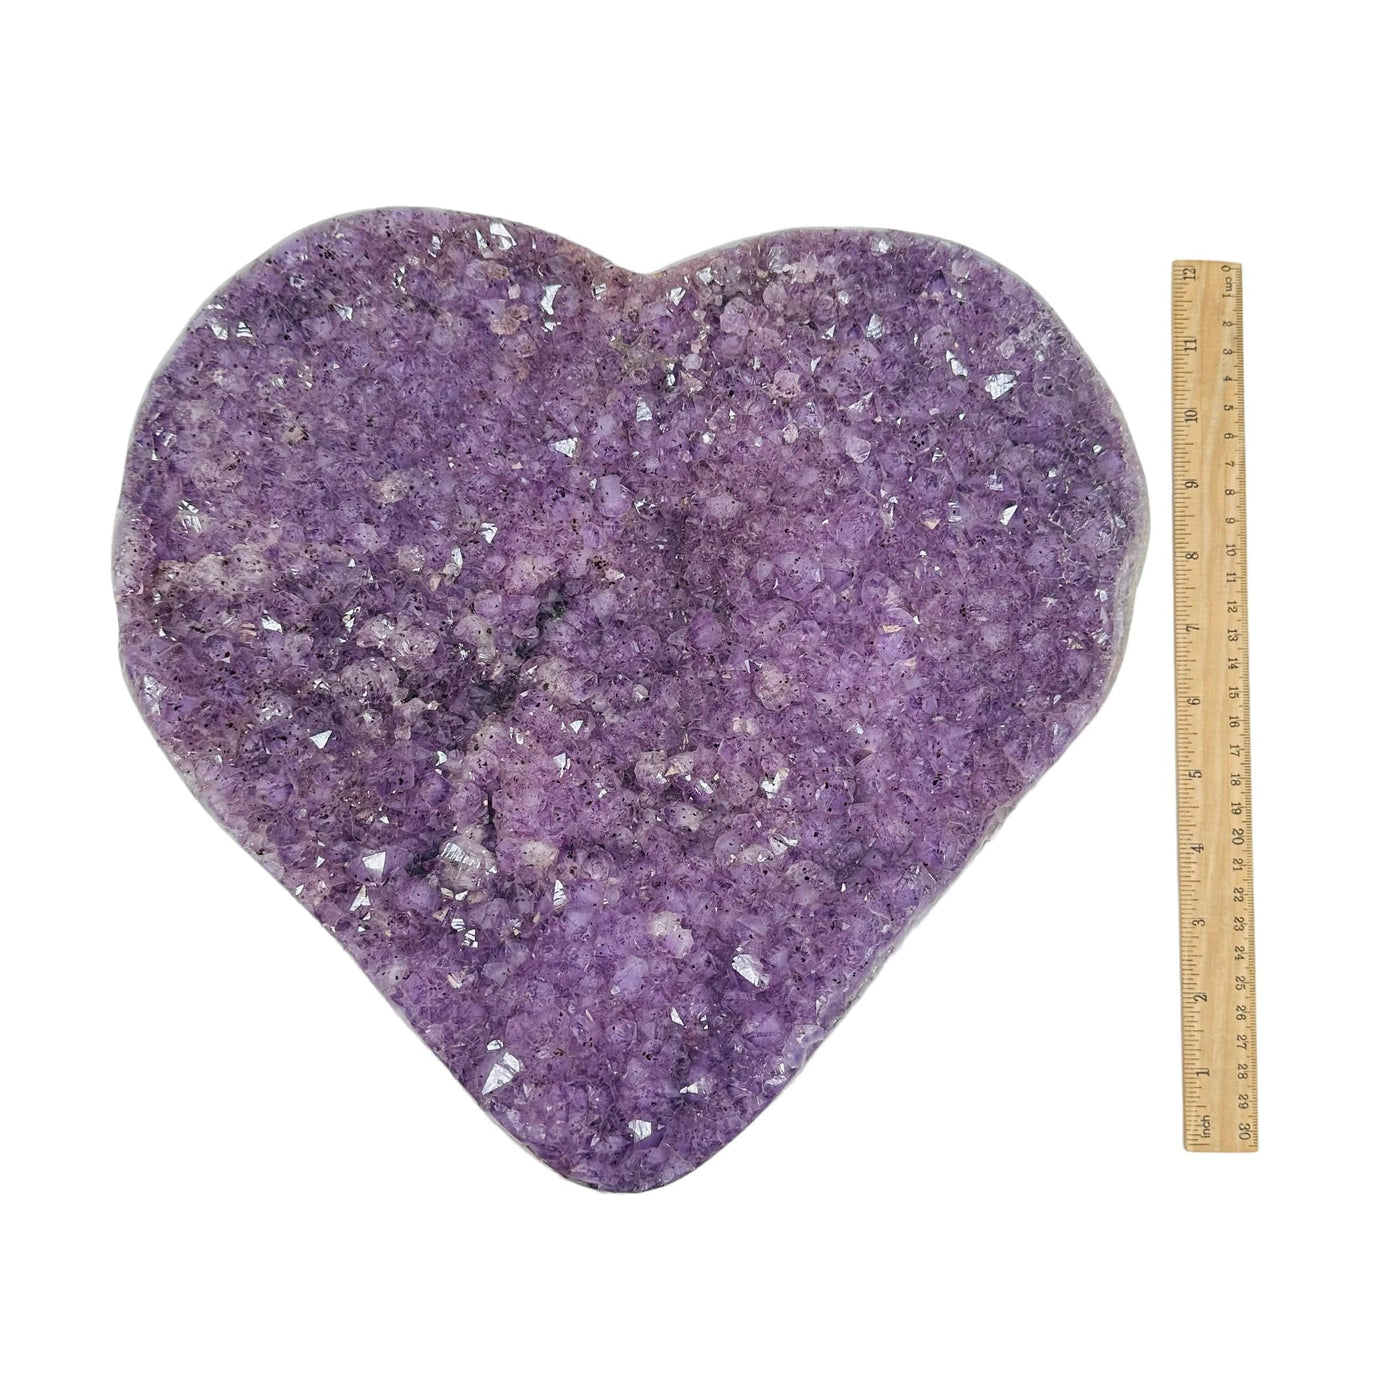 large amethyst heart next to a ruler for size reference 